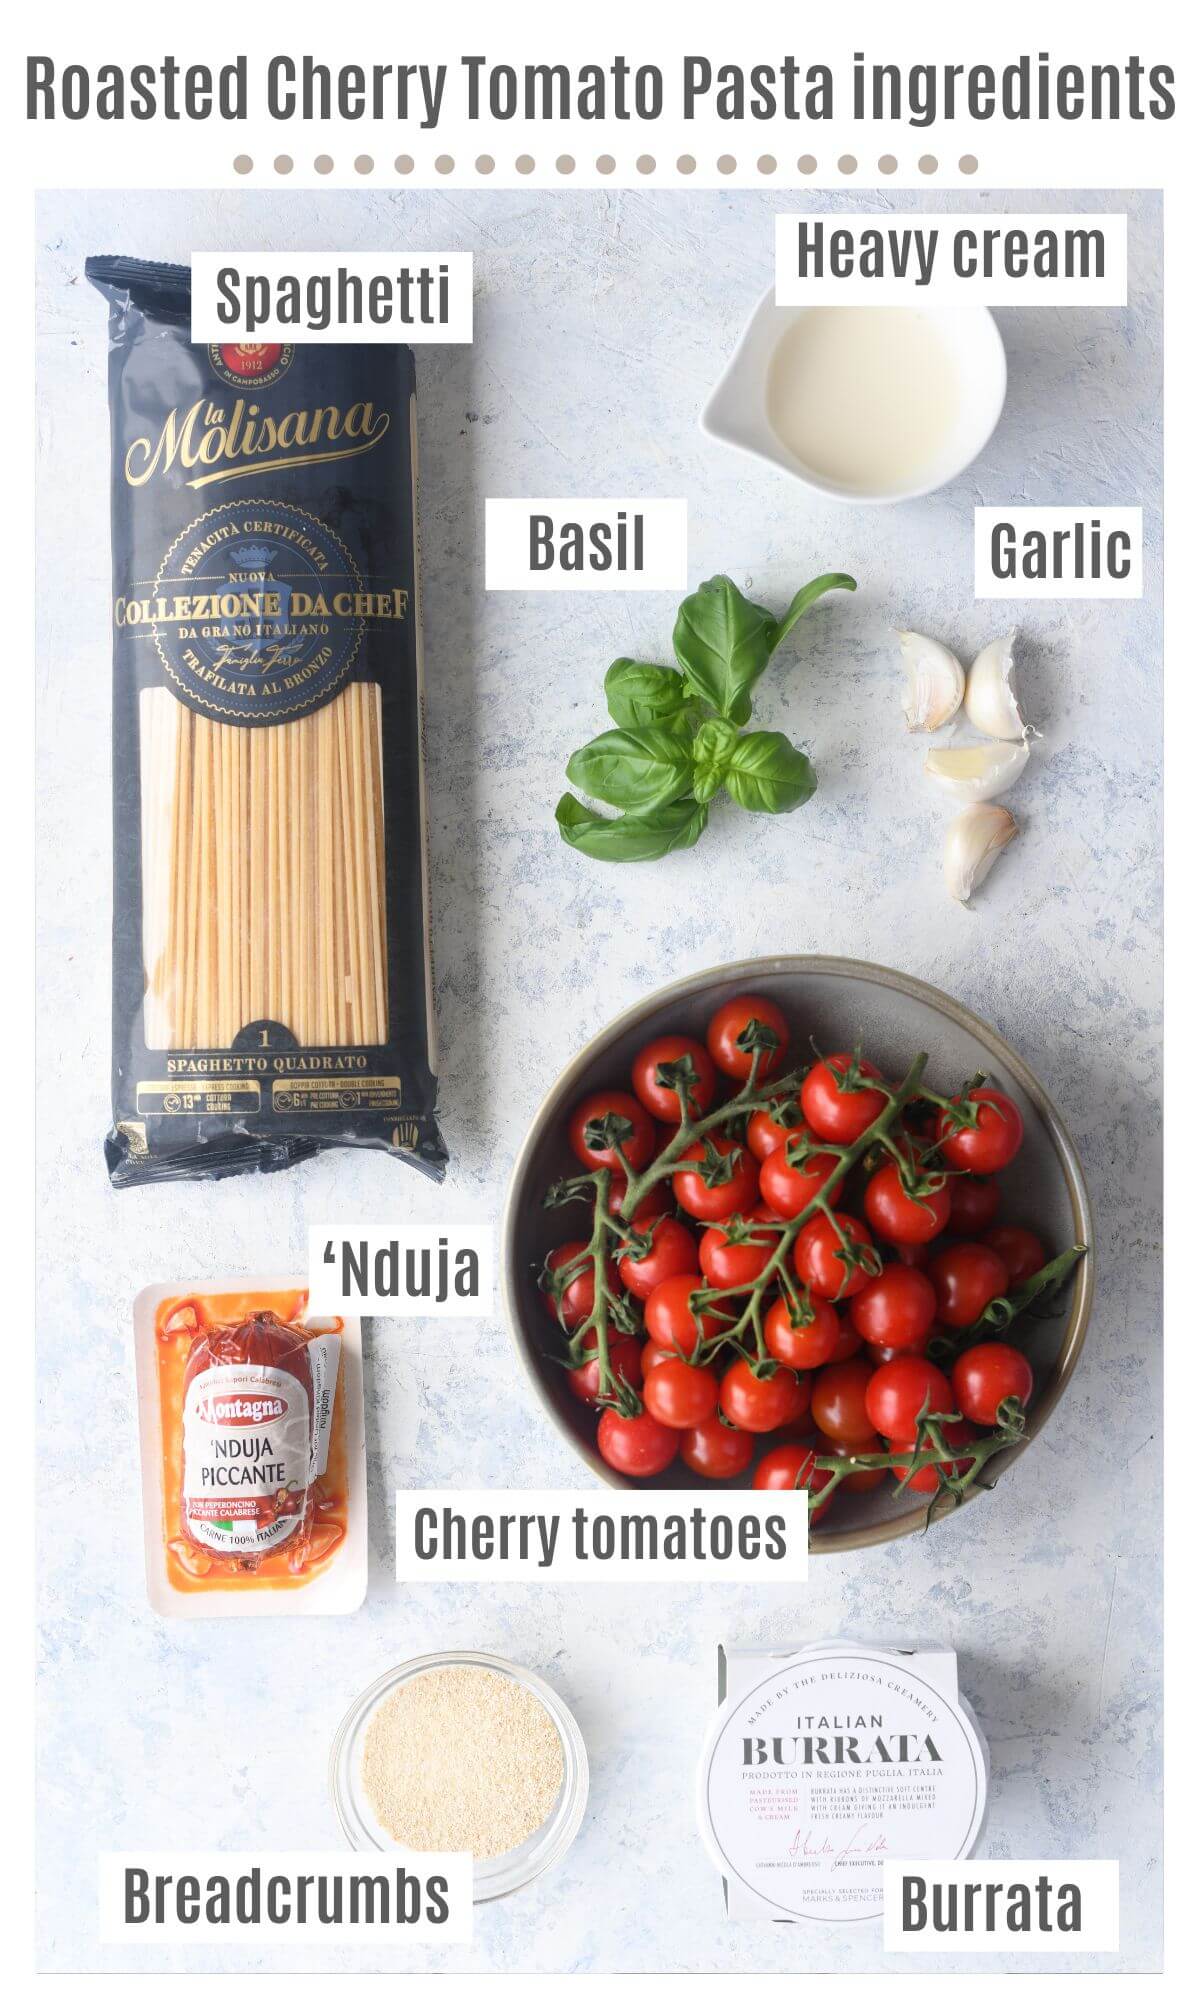 An overhead shot of all the ingredients needed to make roasted cherry tomato spaghetti with burrata and 'Nduja.